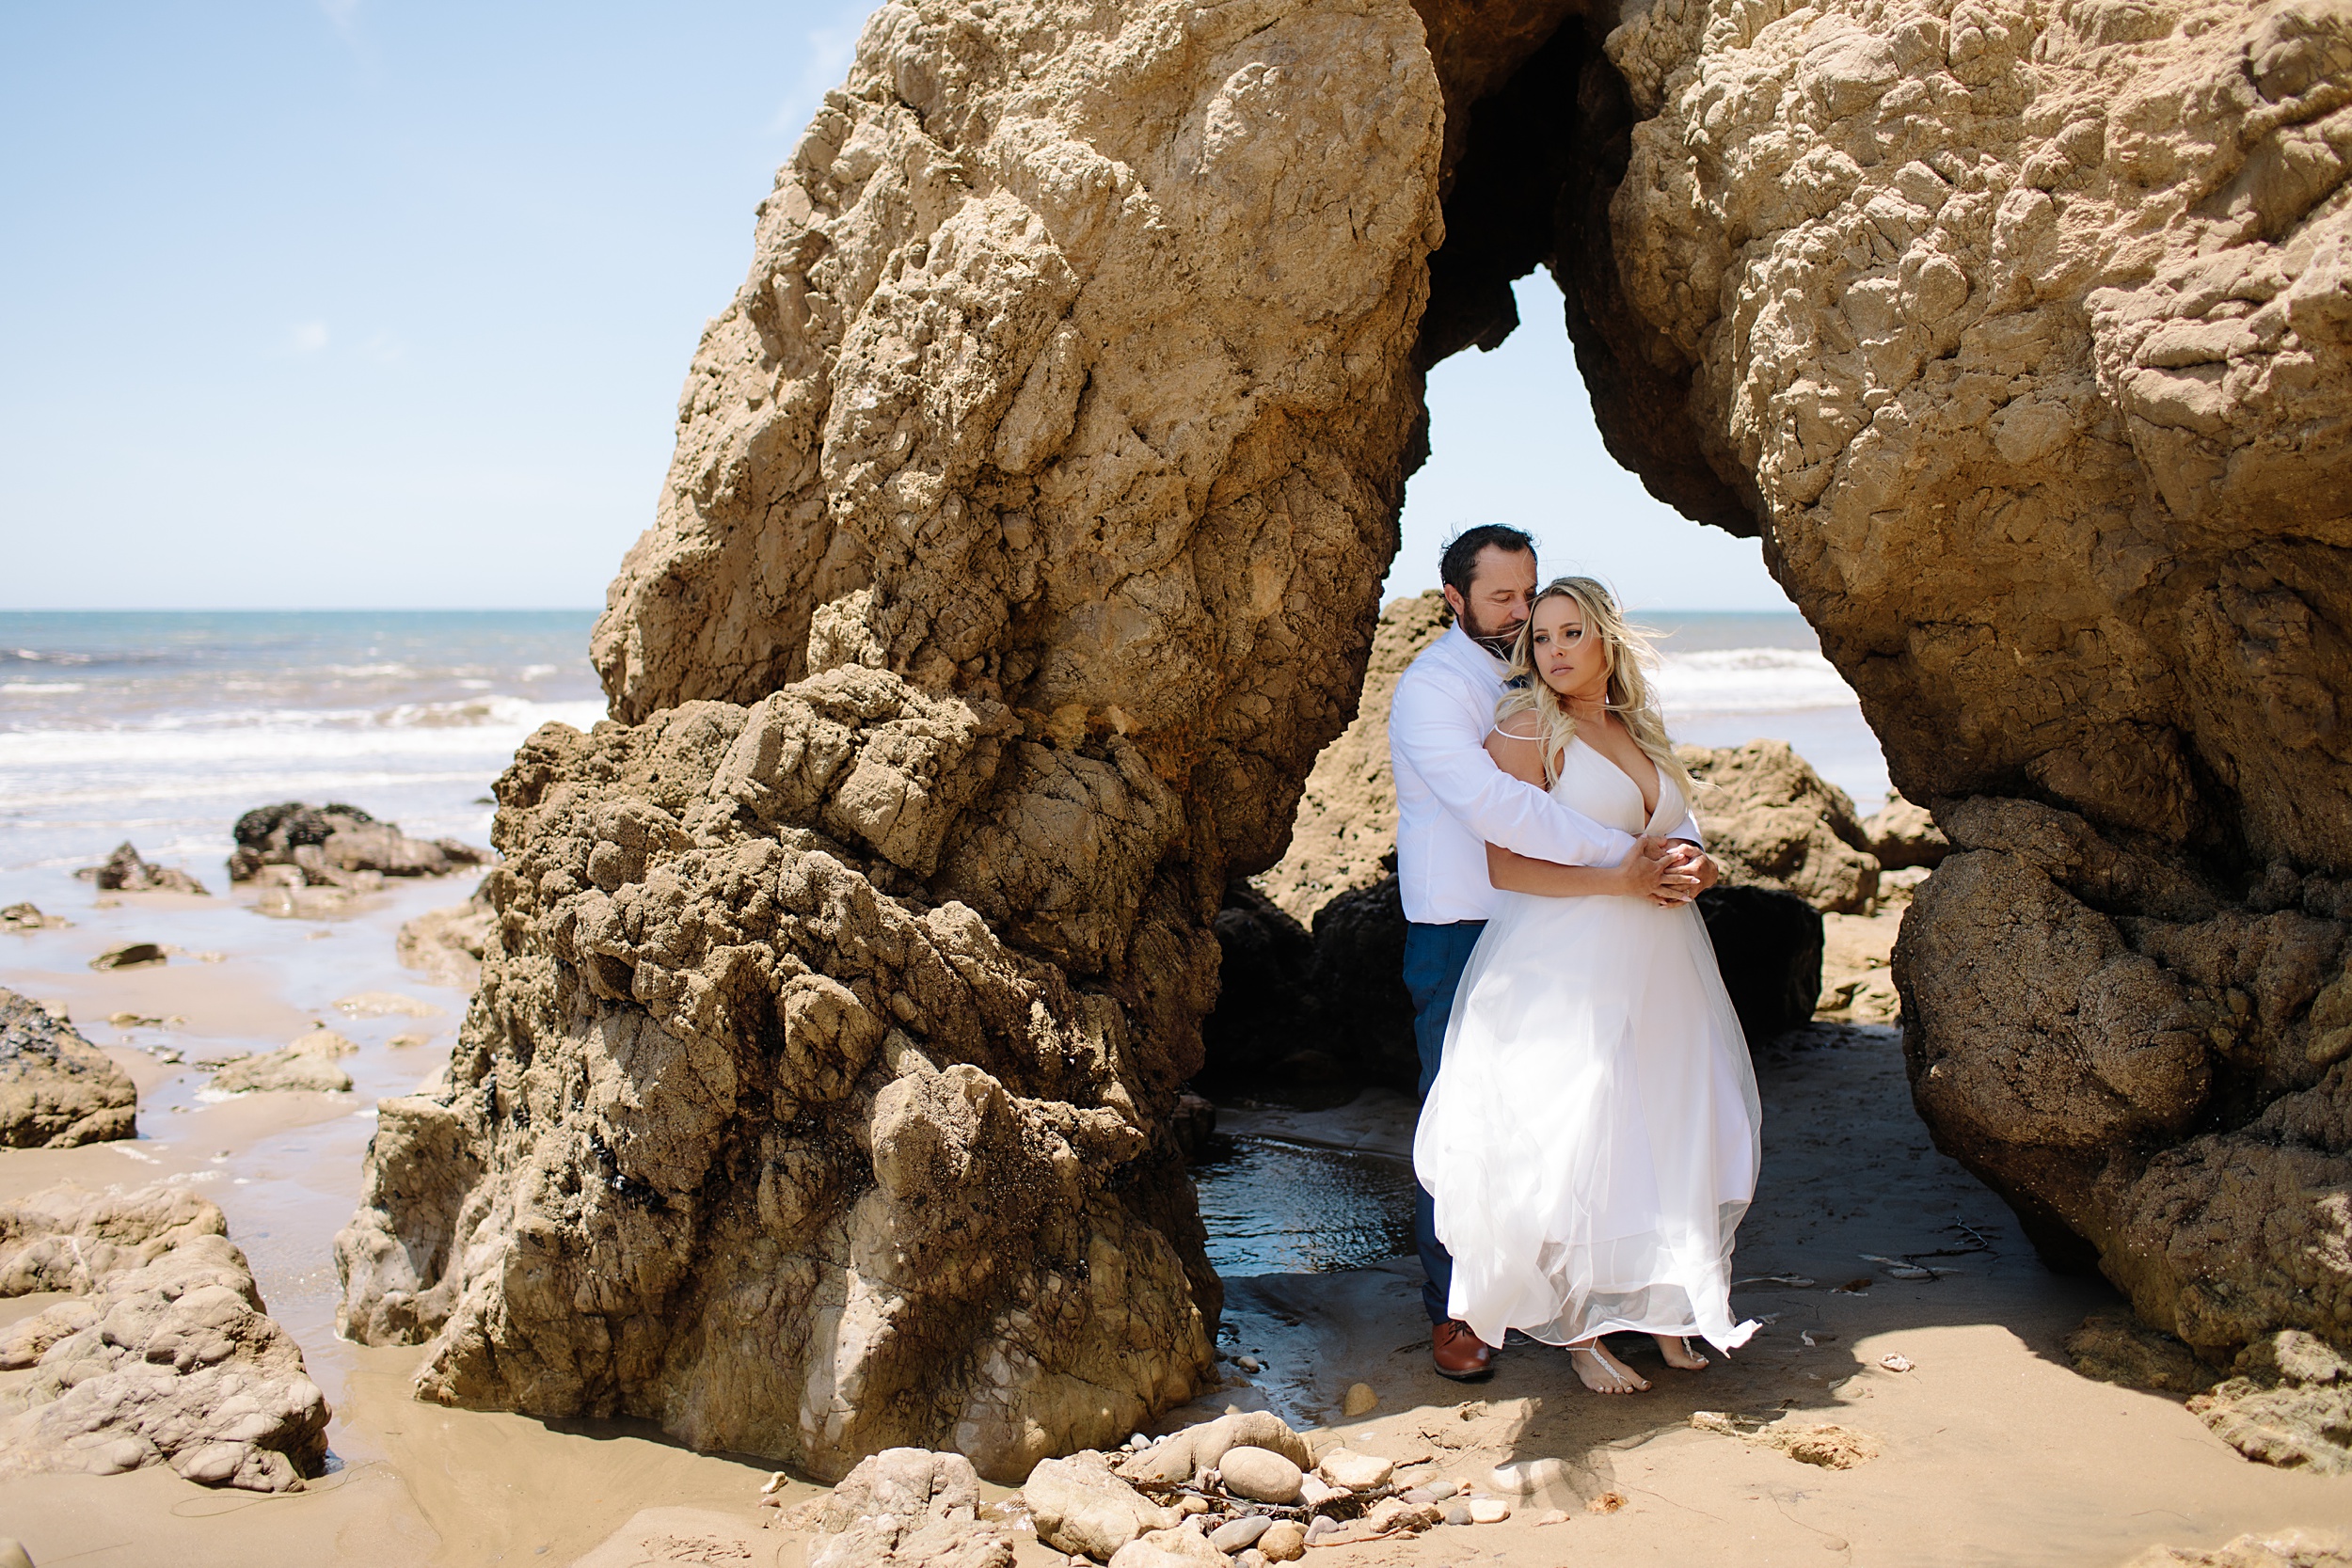 Nicole-and-Russell_0047 Breezy Los Angeles Beach Elopement in Rocky Sea Caves